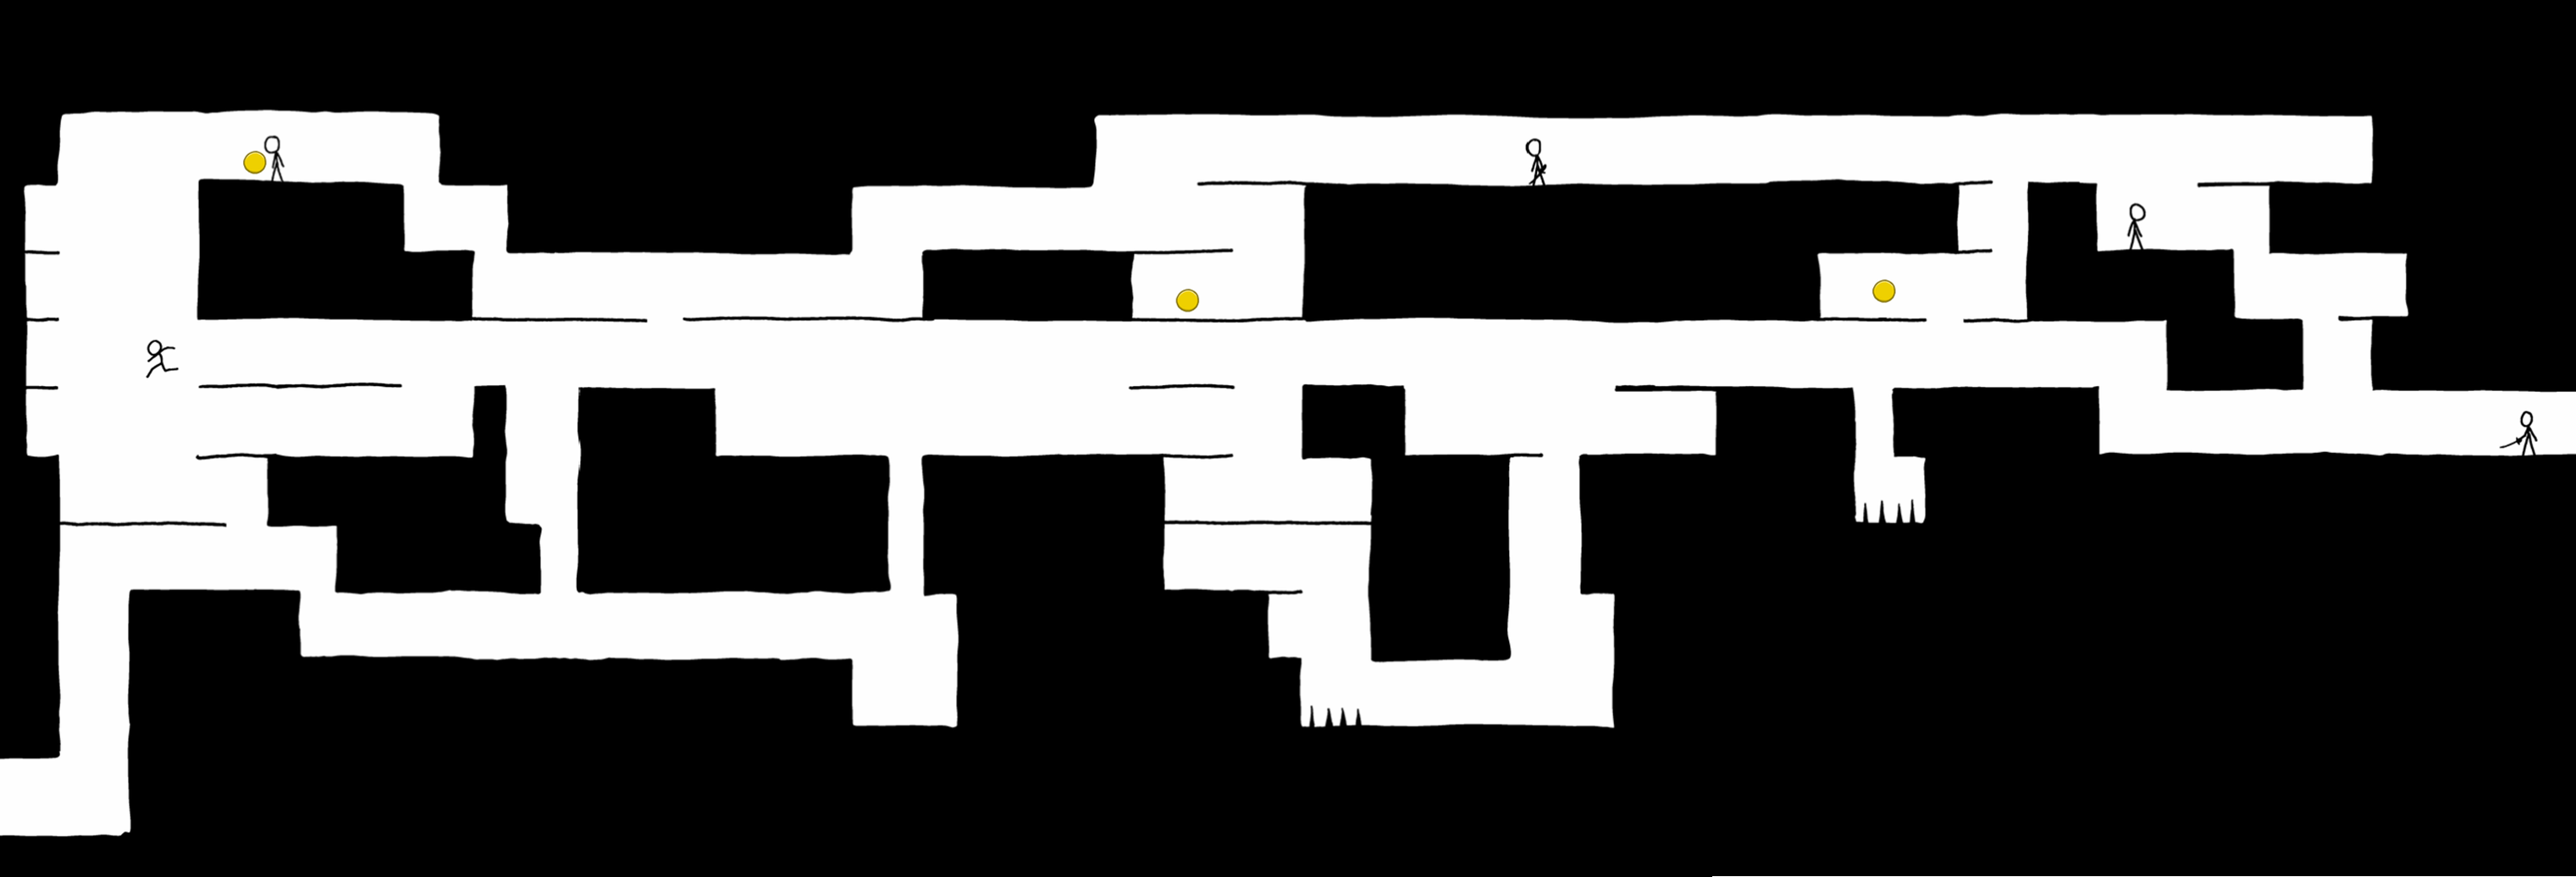 1608 Entire Prince of Persia maze.png